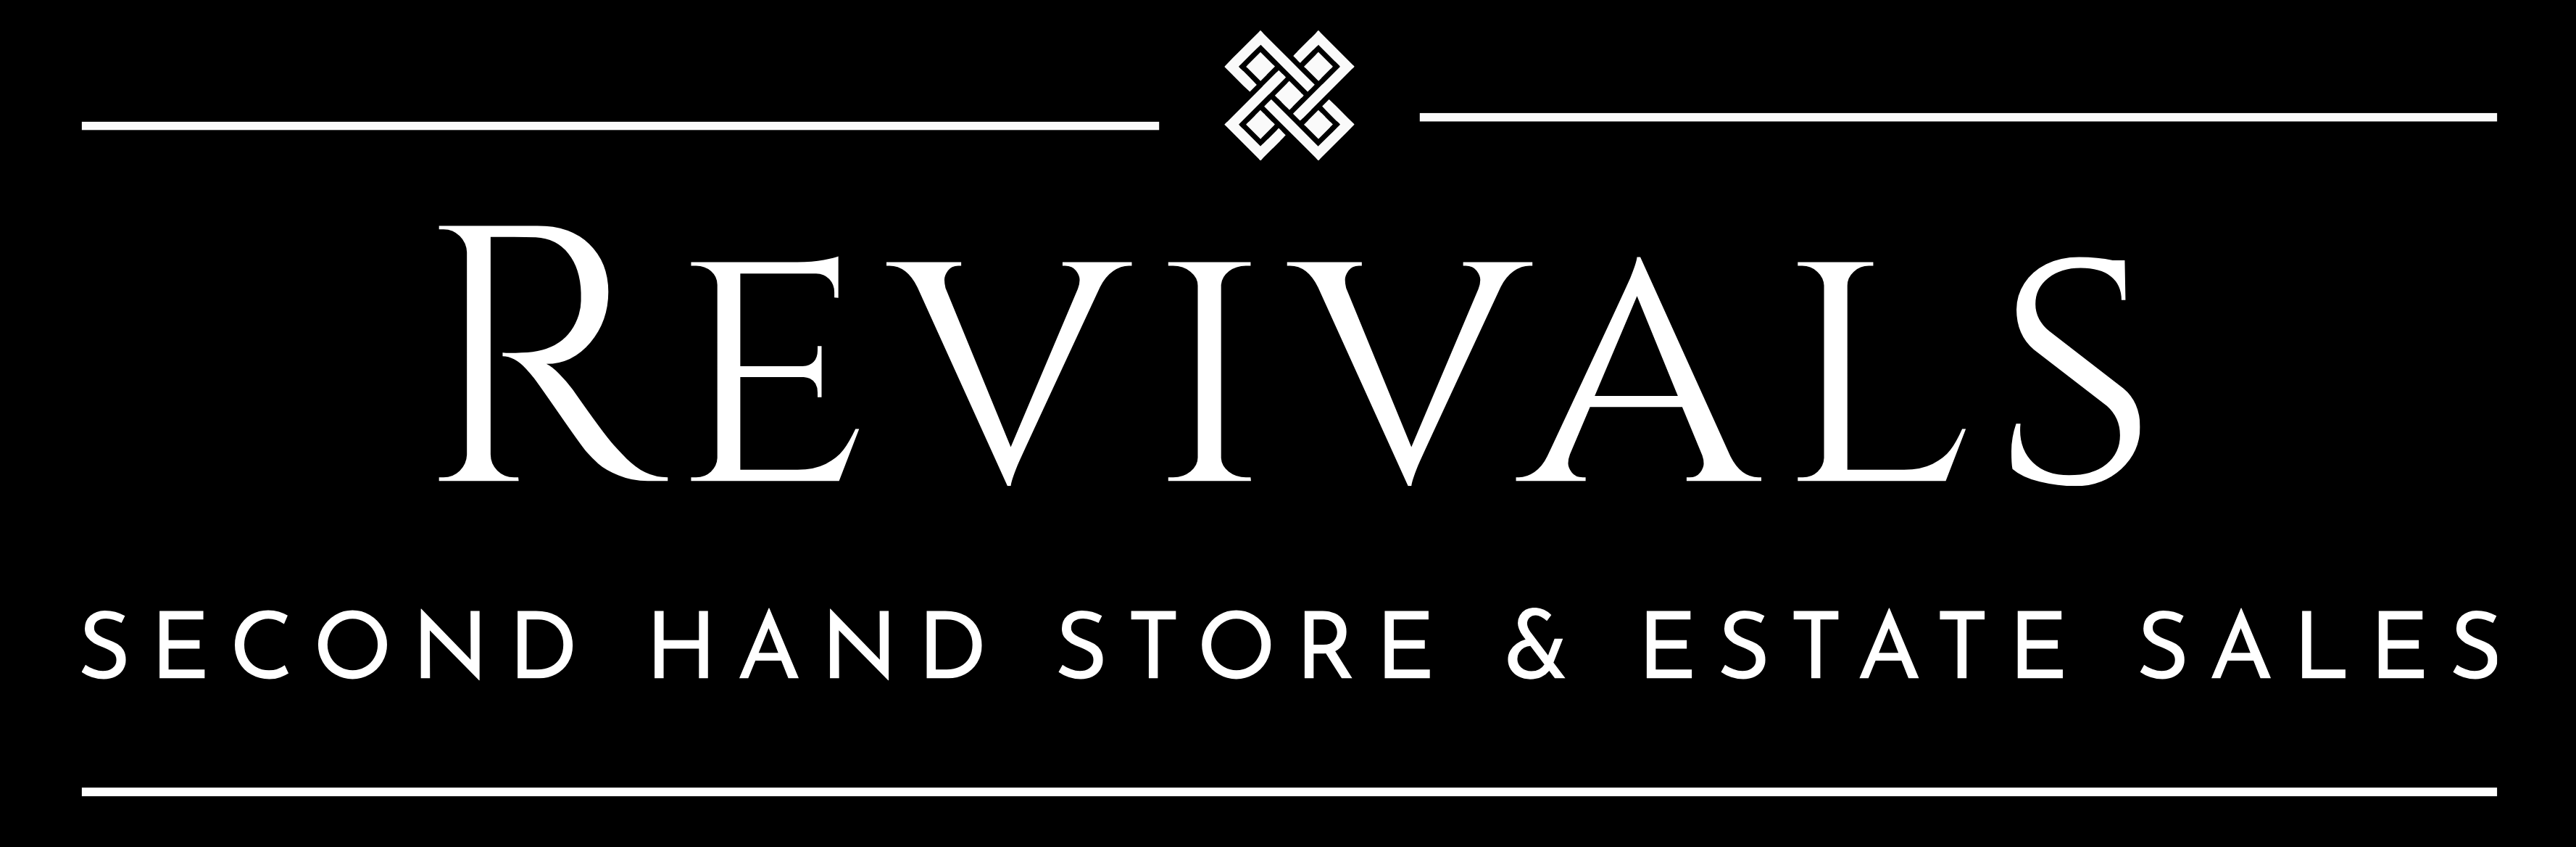 Revivals - Estate Sales and Second Hand Store